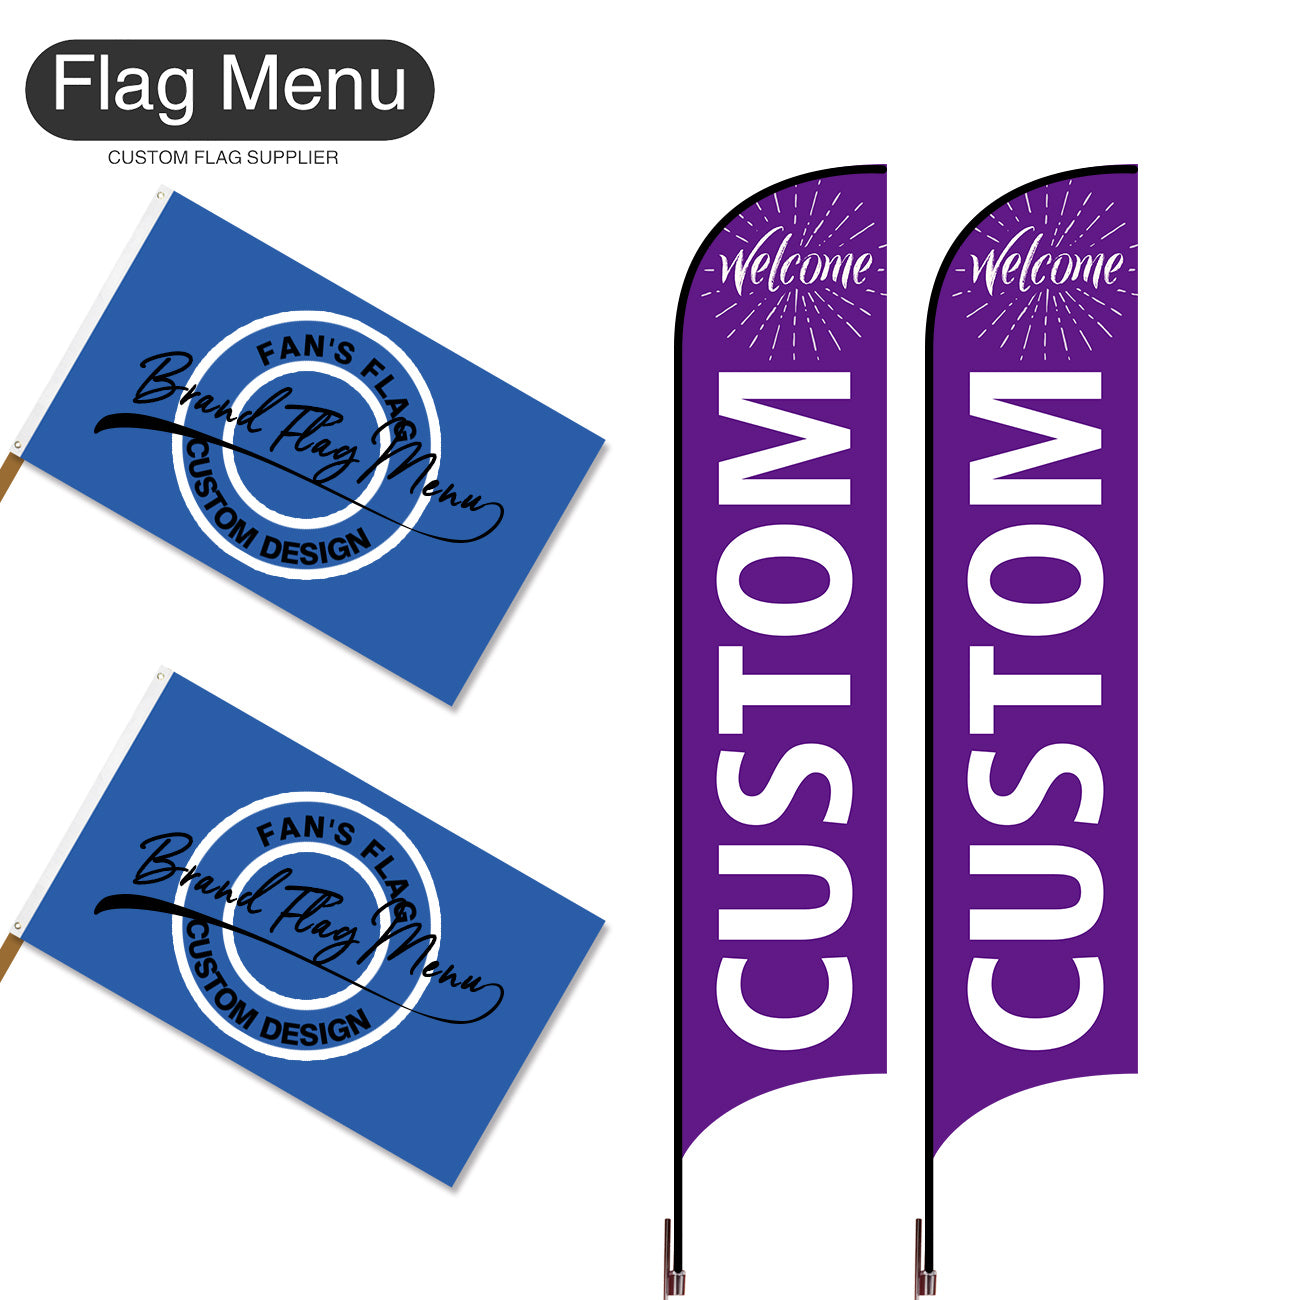 Outdoor Advertising Set - C-Purple A-S - Feather Flag -Double Sided & 3'x5' Regular Flag -Single Sided-Cross & Water Bag-Flag Menu